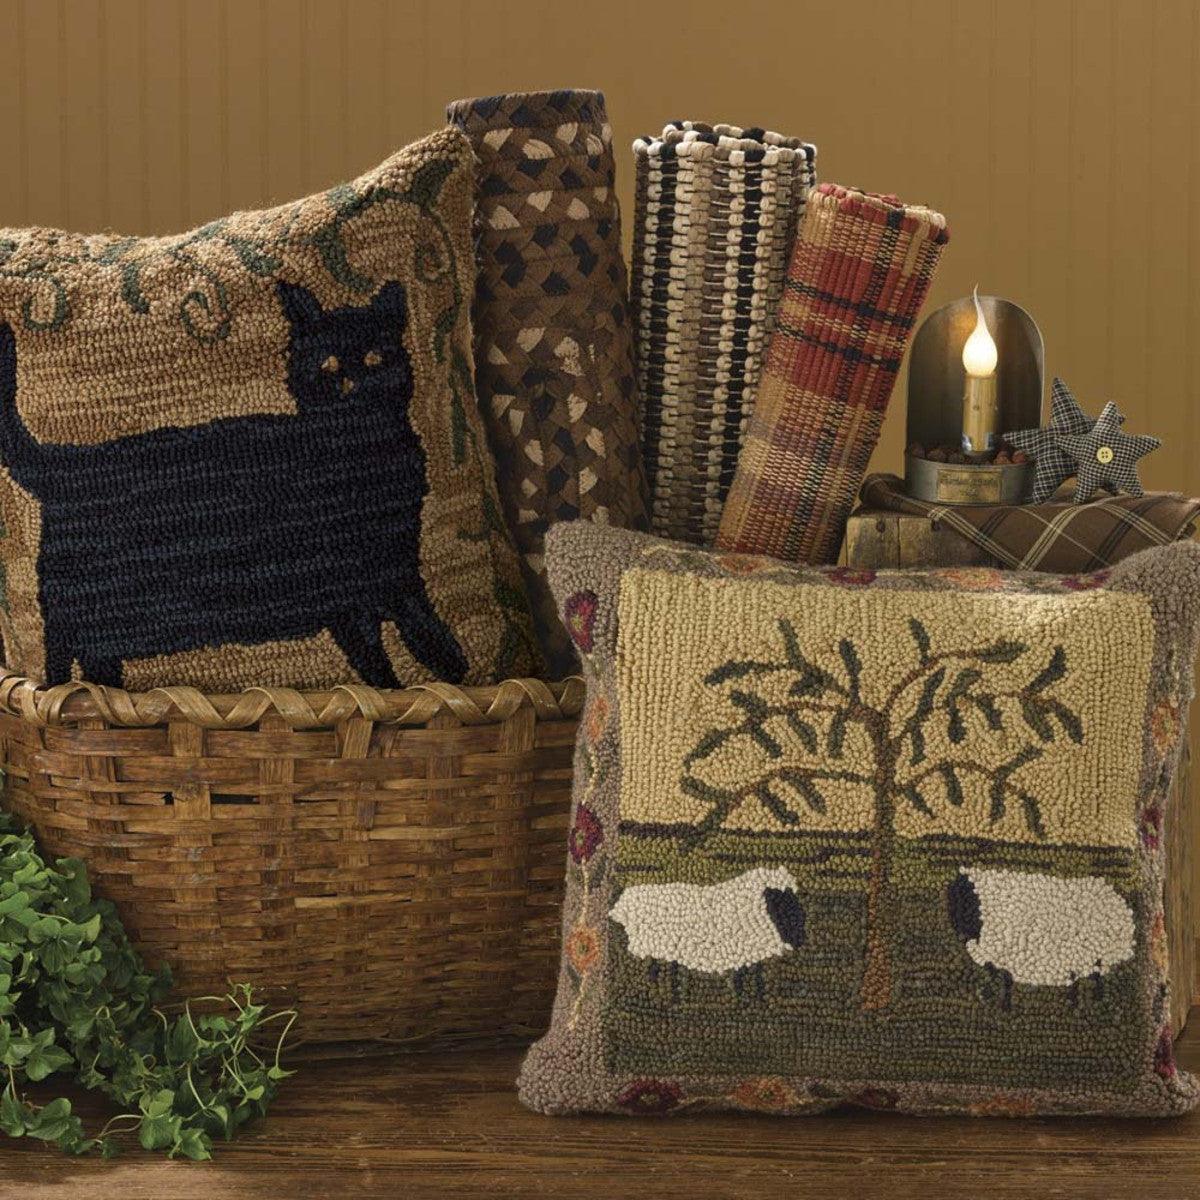 Willow & Sheep Hooked Pillow Set Polyester Fill 18"x18" - Park Designs - The Fox Decor